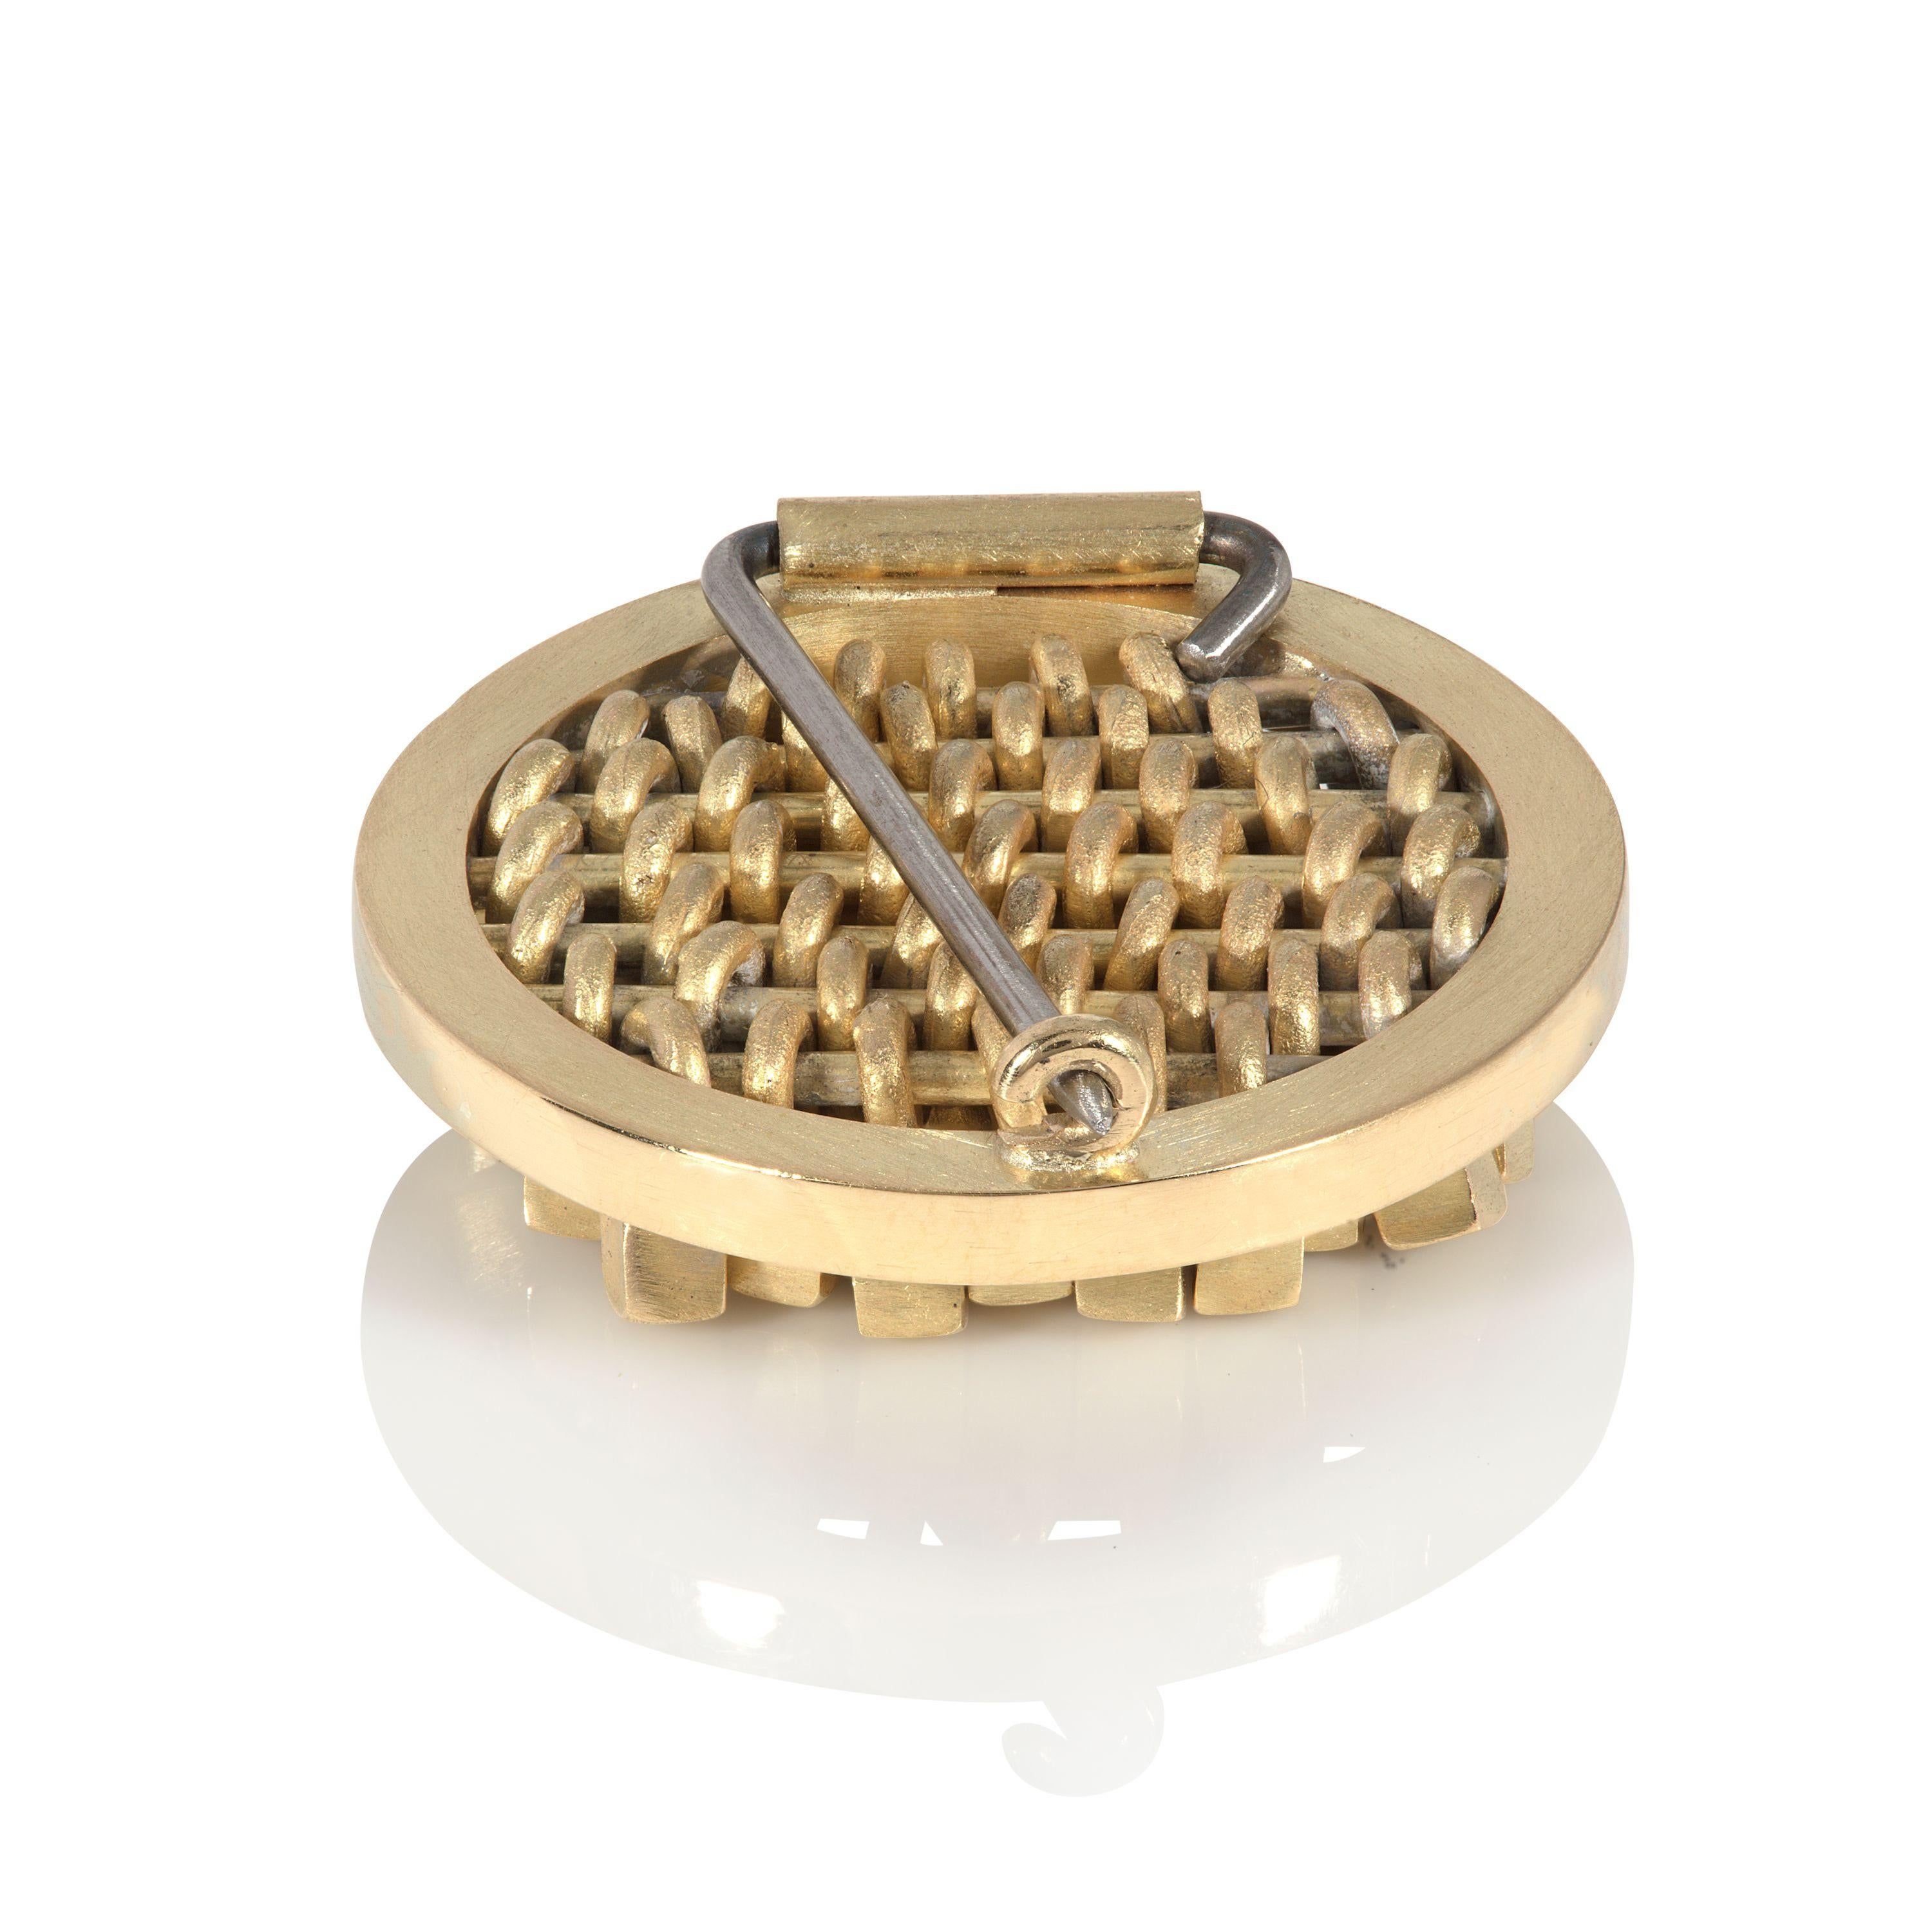 This elegant, striking brooch in 18K gold is designed and made by UK jeweler Sarah Pulvertaft. Within its simple circle frame the entire brooch is comprised of individual mini cubes. These moveable cubes, each capturing the reflection of light